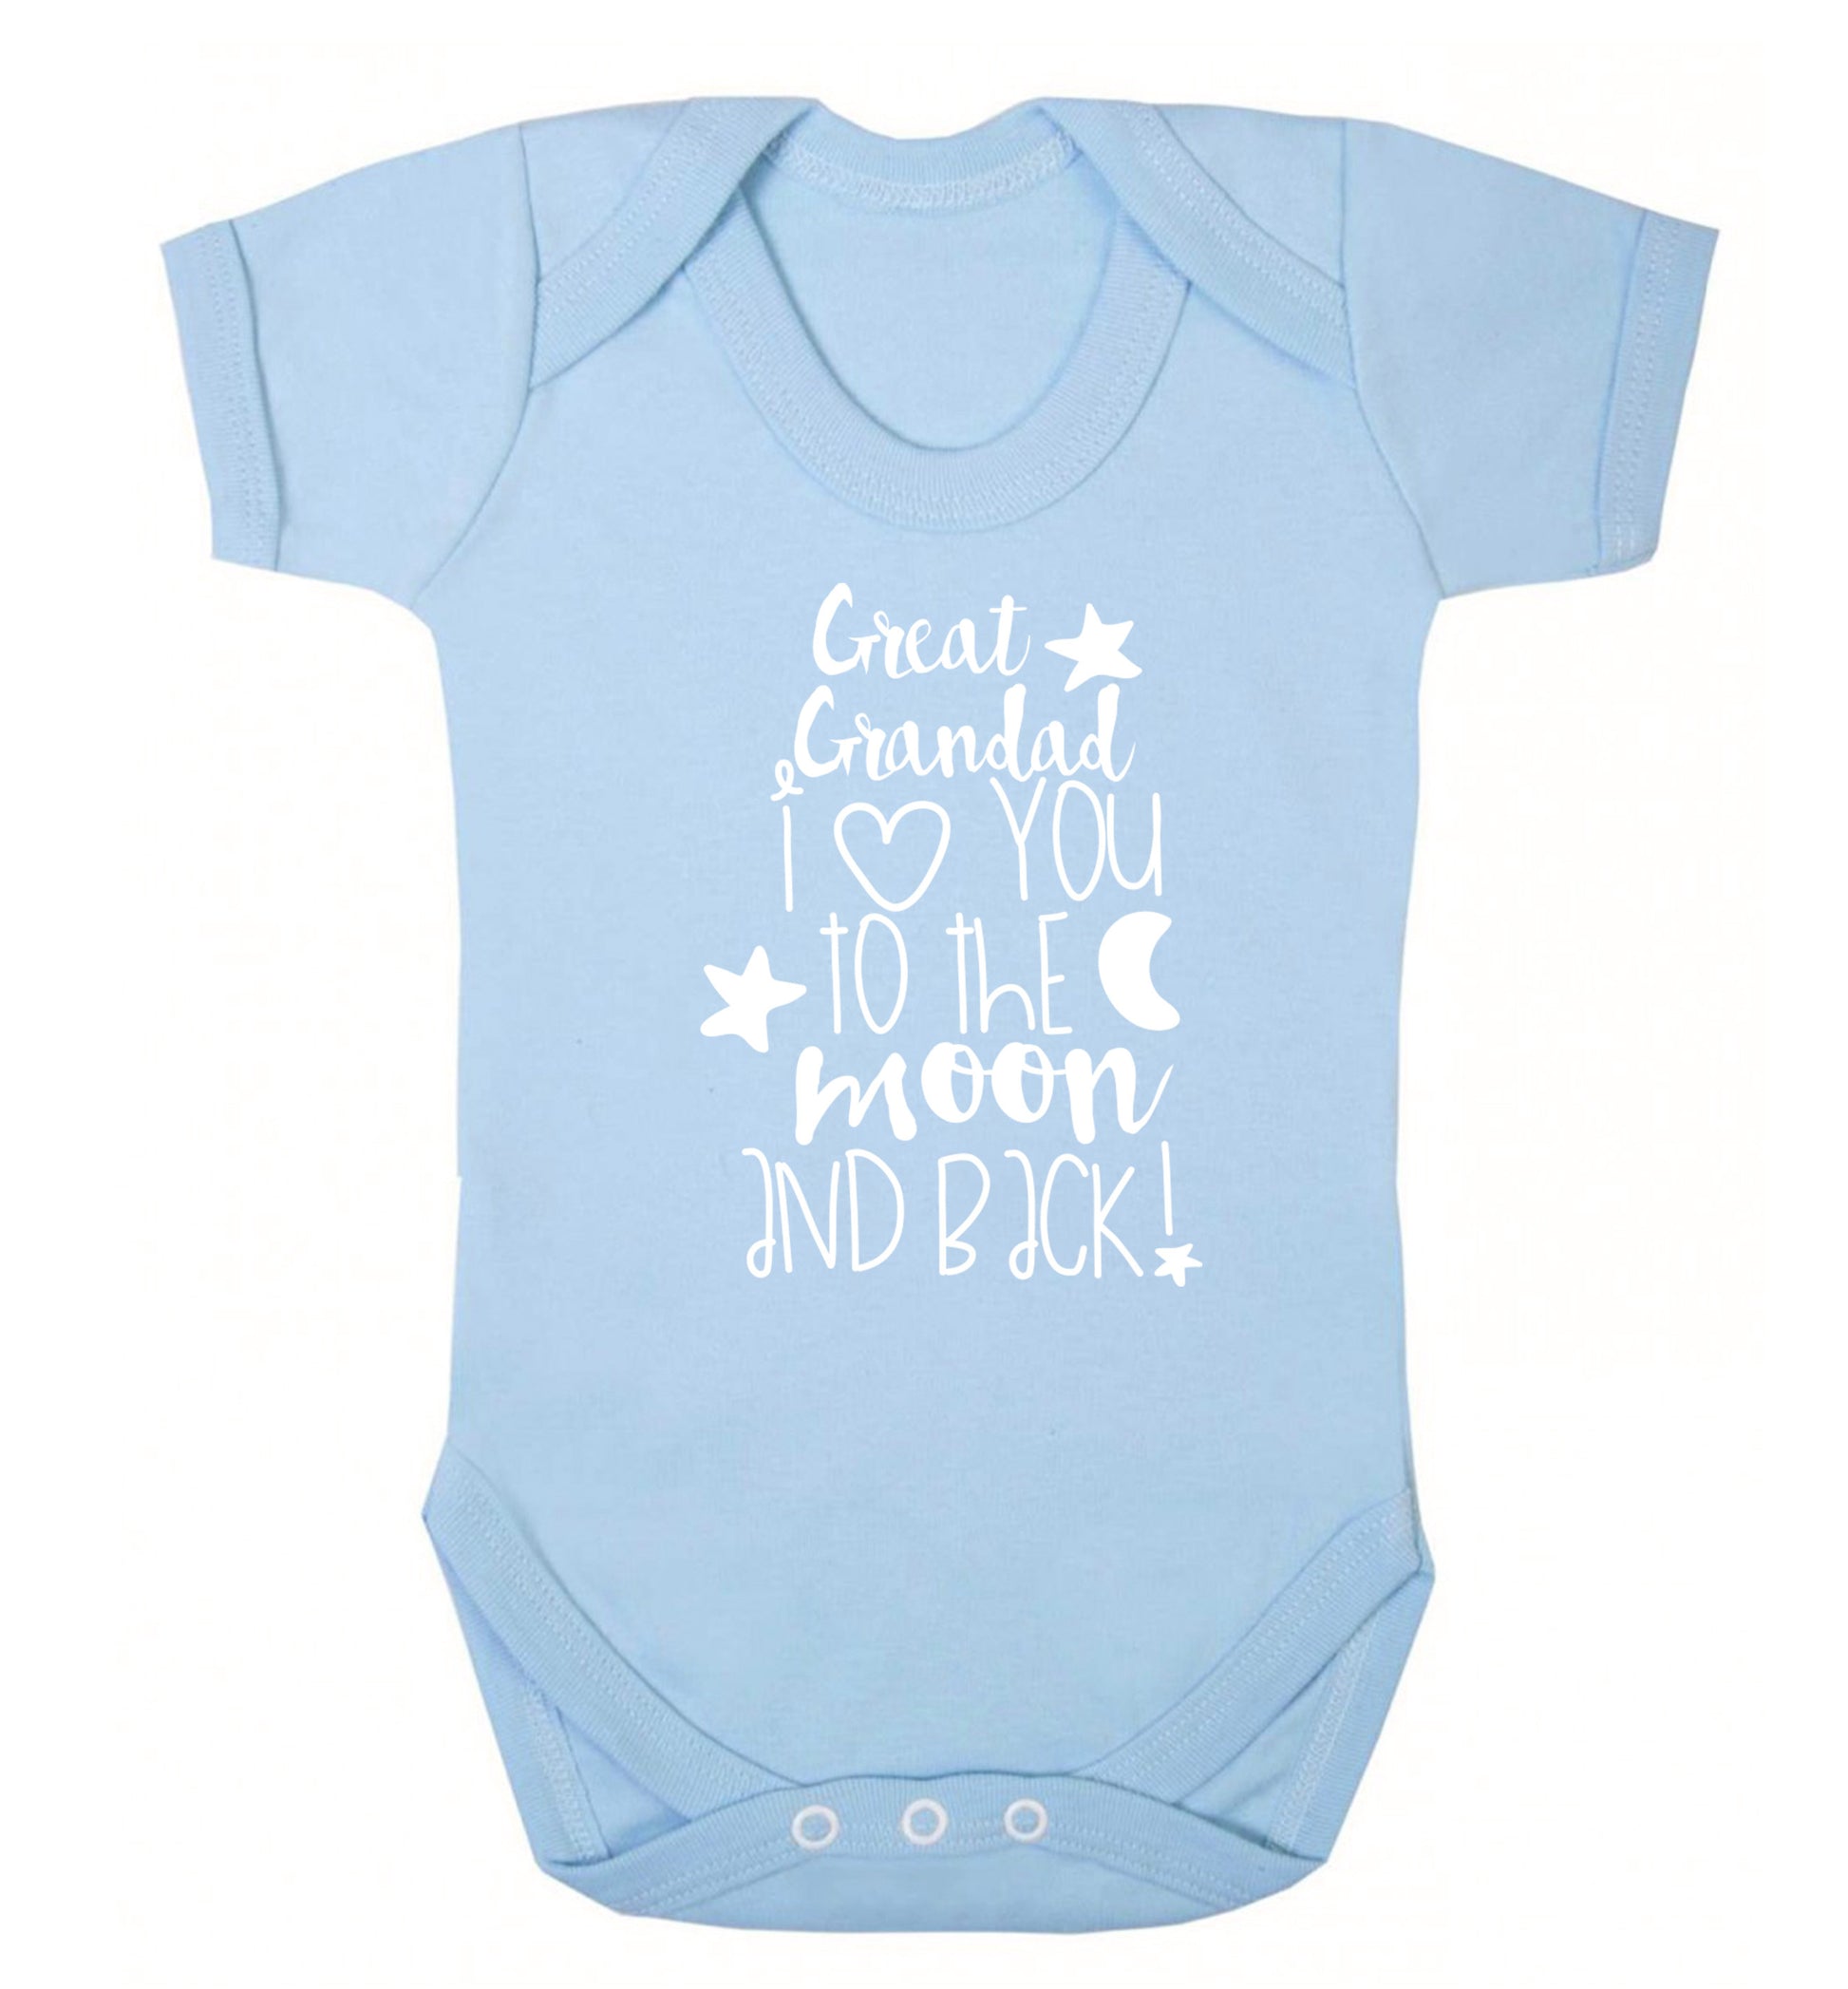 Great Grandad I love you to the moon and back Baby Vest pale blue 18-24 months